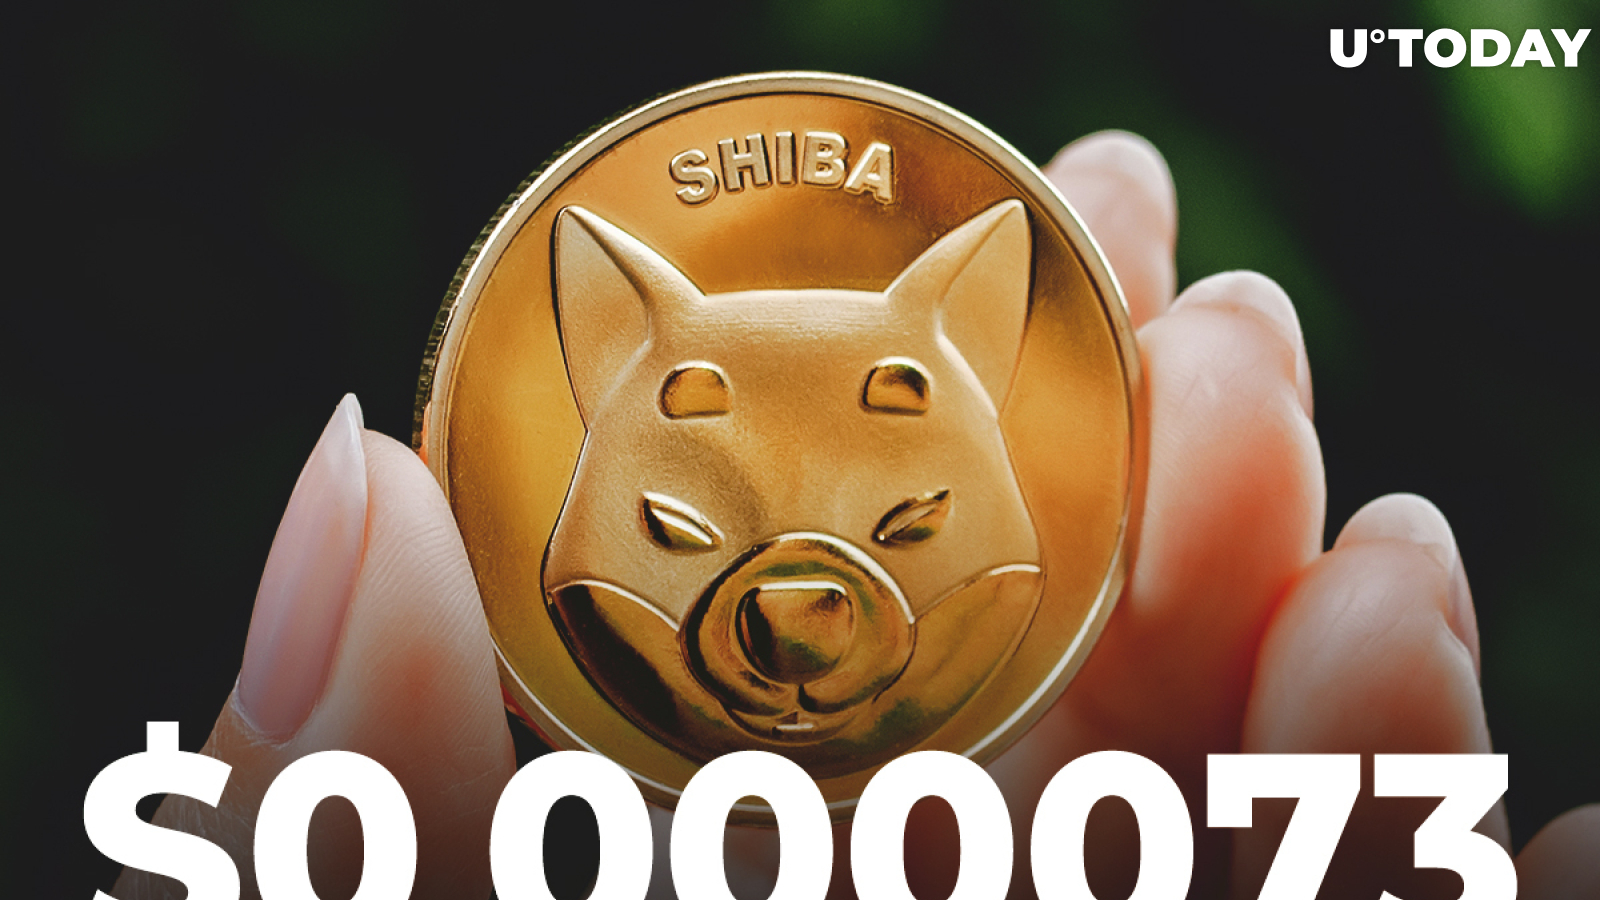 SHIB Recovers to $0.000073 After 22.4 Million SHIB and 8 Million DOGE Were Liquidated in Past Hour